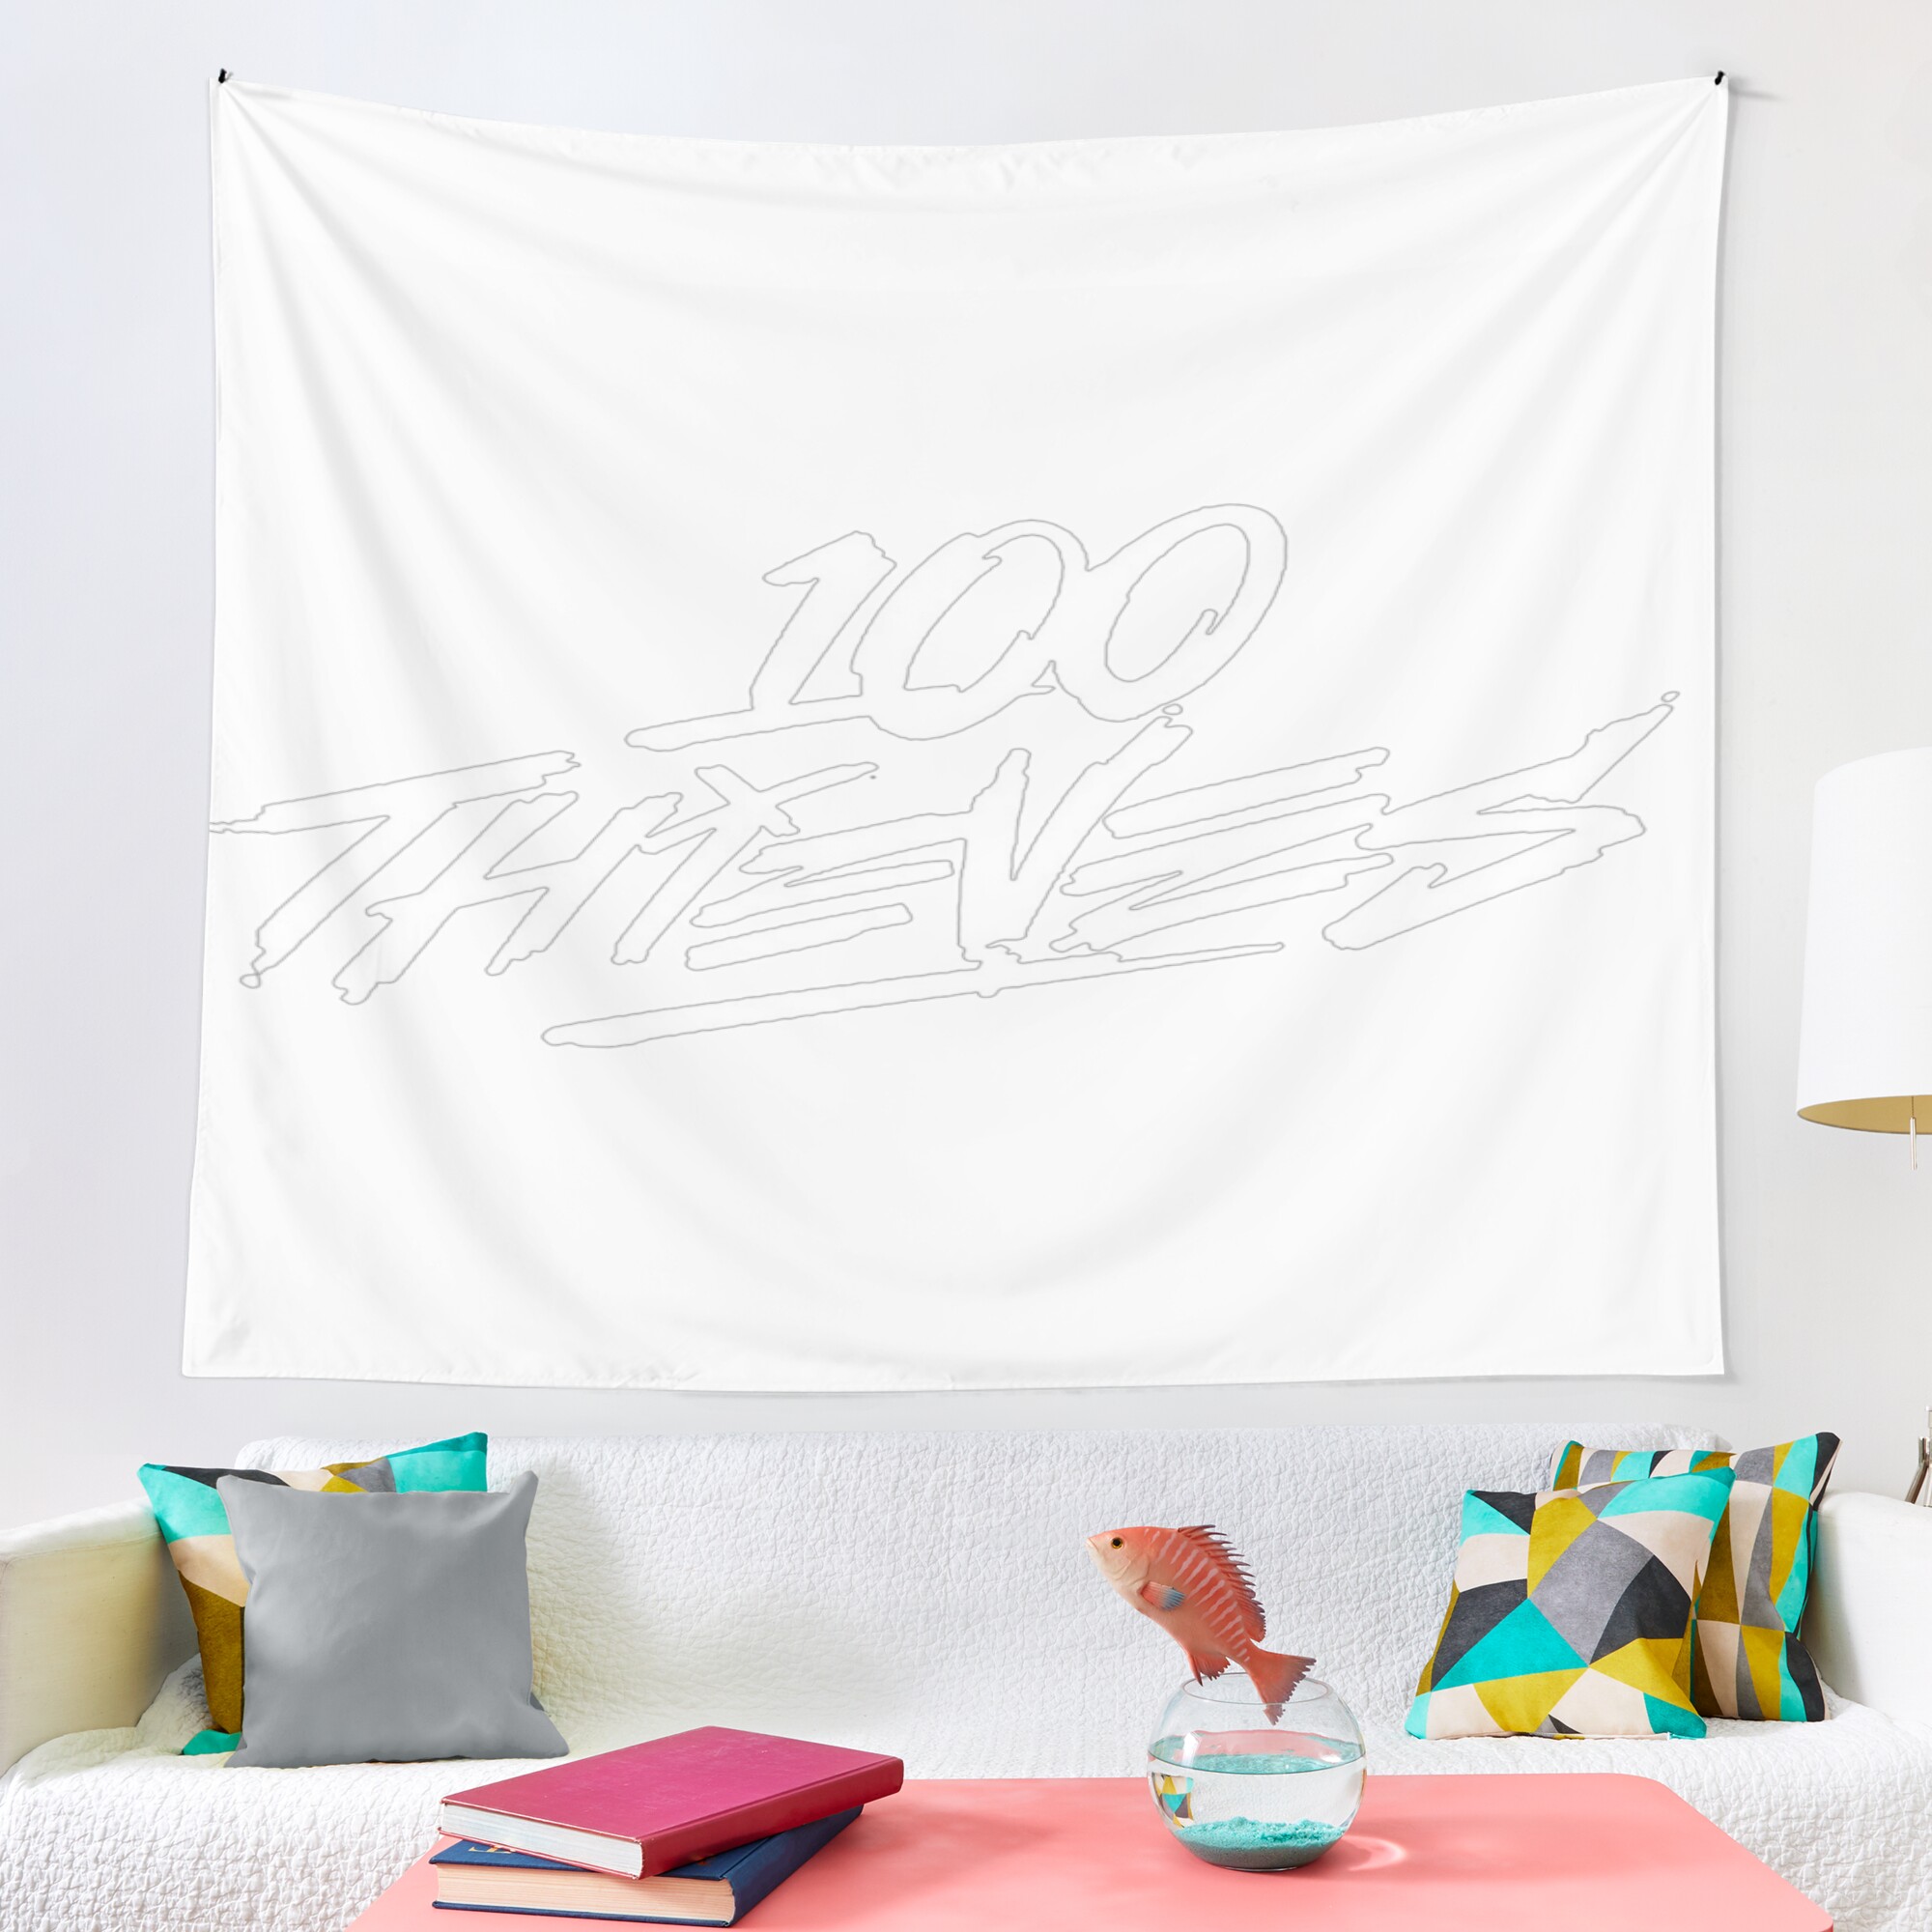 urtapestry lifestyle largesquare2000x2000 11 - 100 Thieves Shop